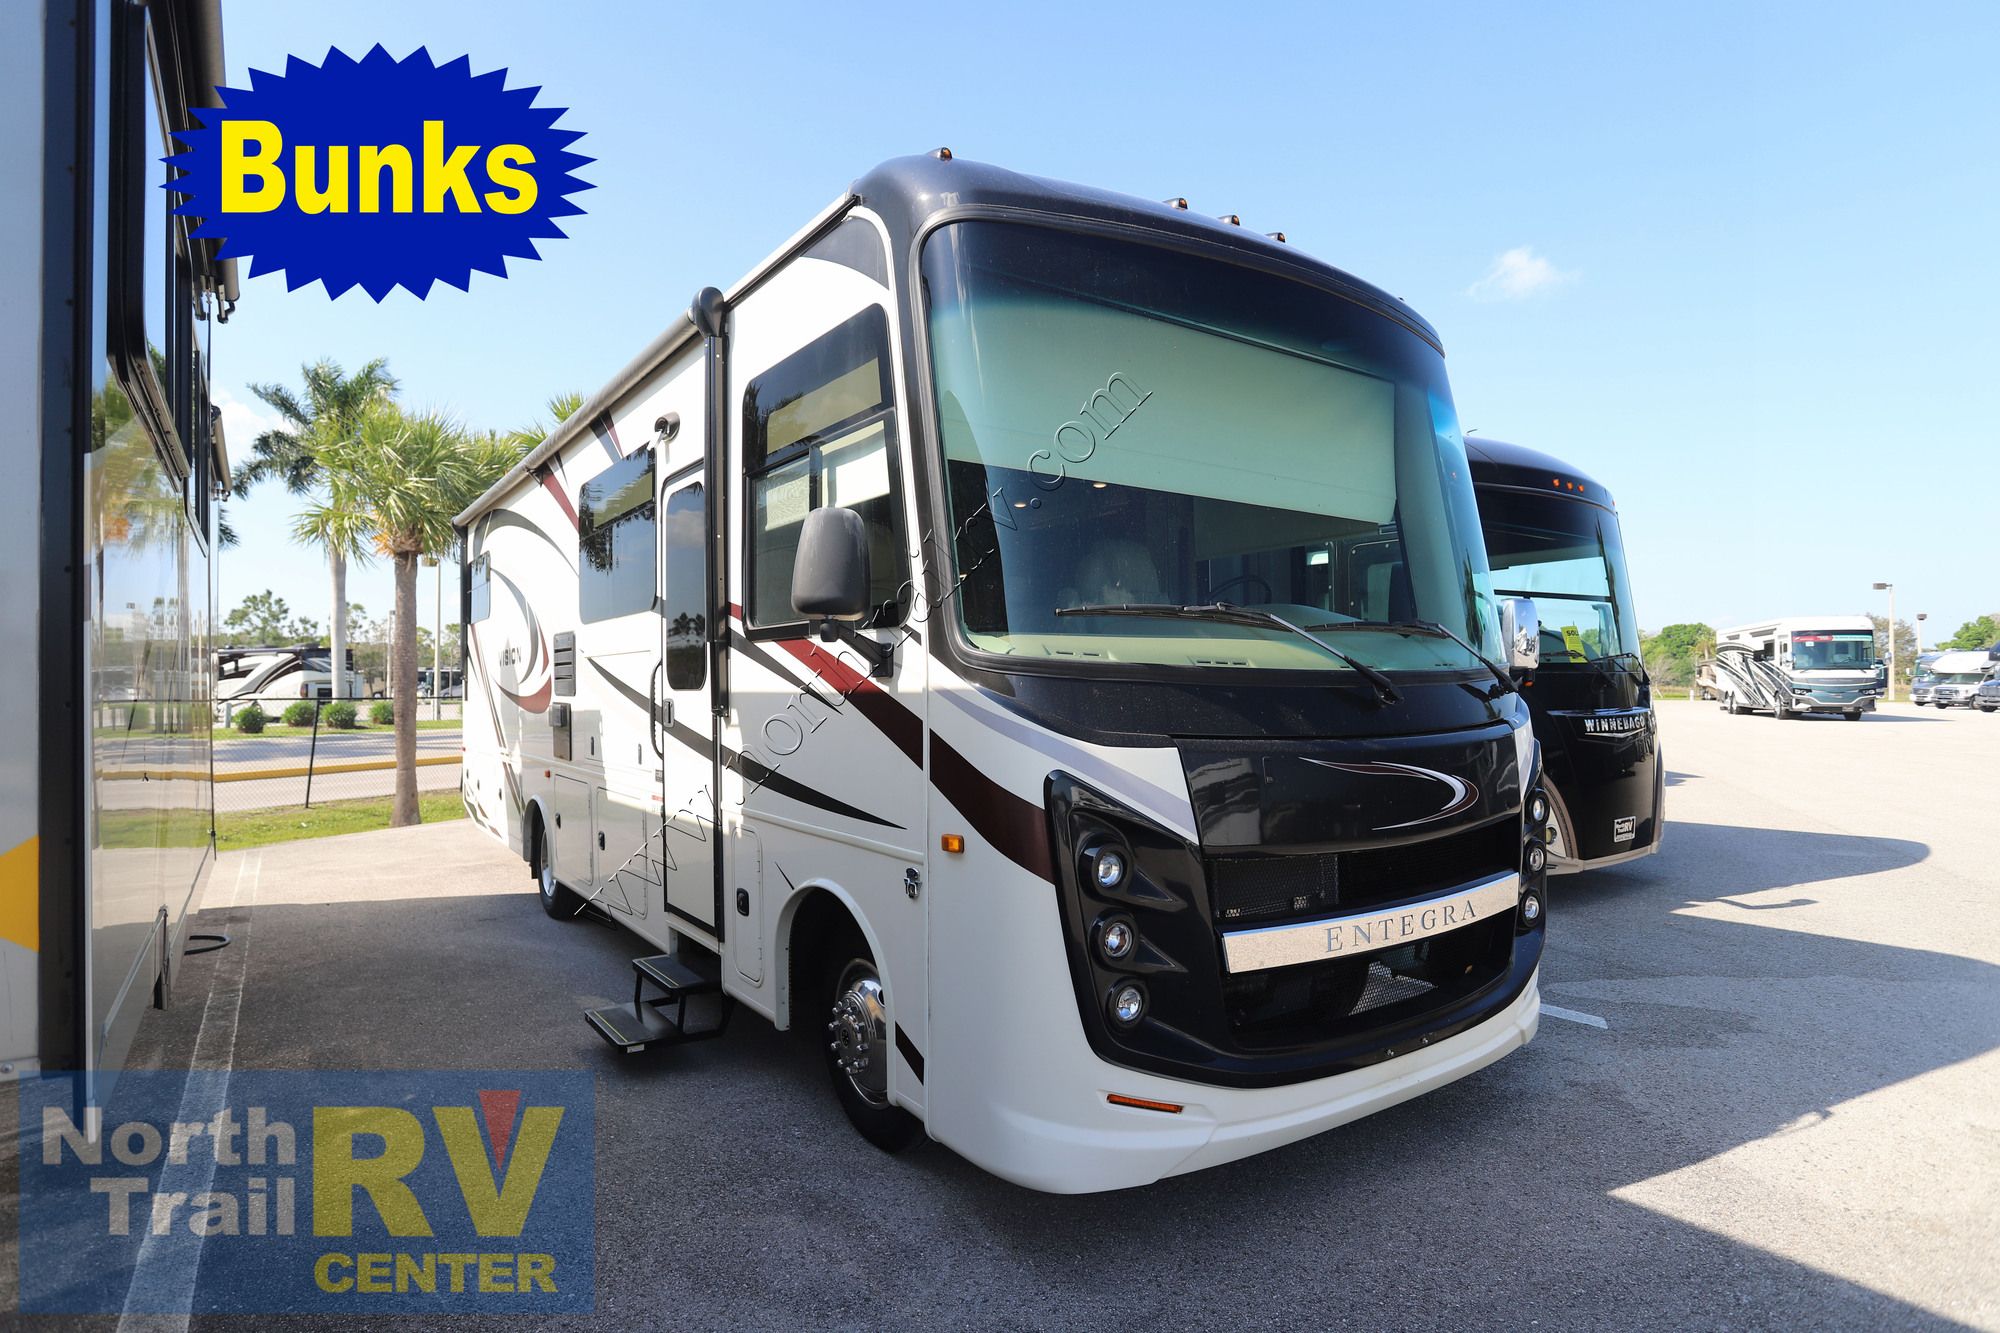 Used 2020 Entegra Vision 29F Class A  For Sale